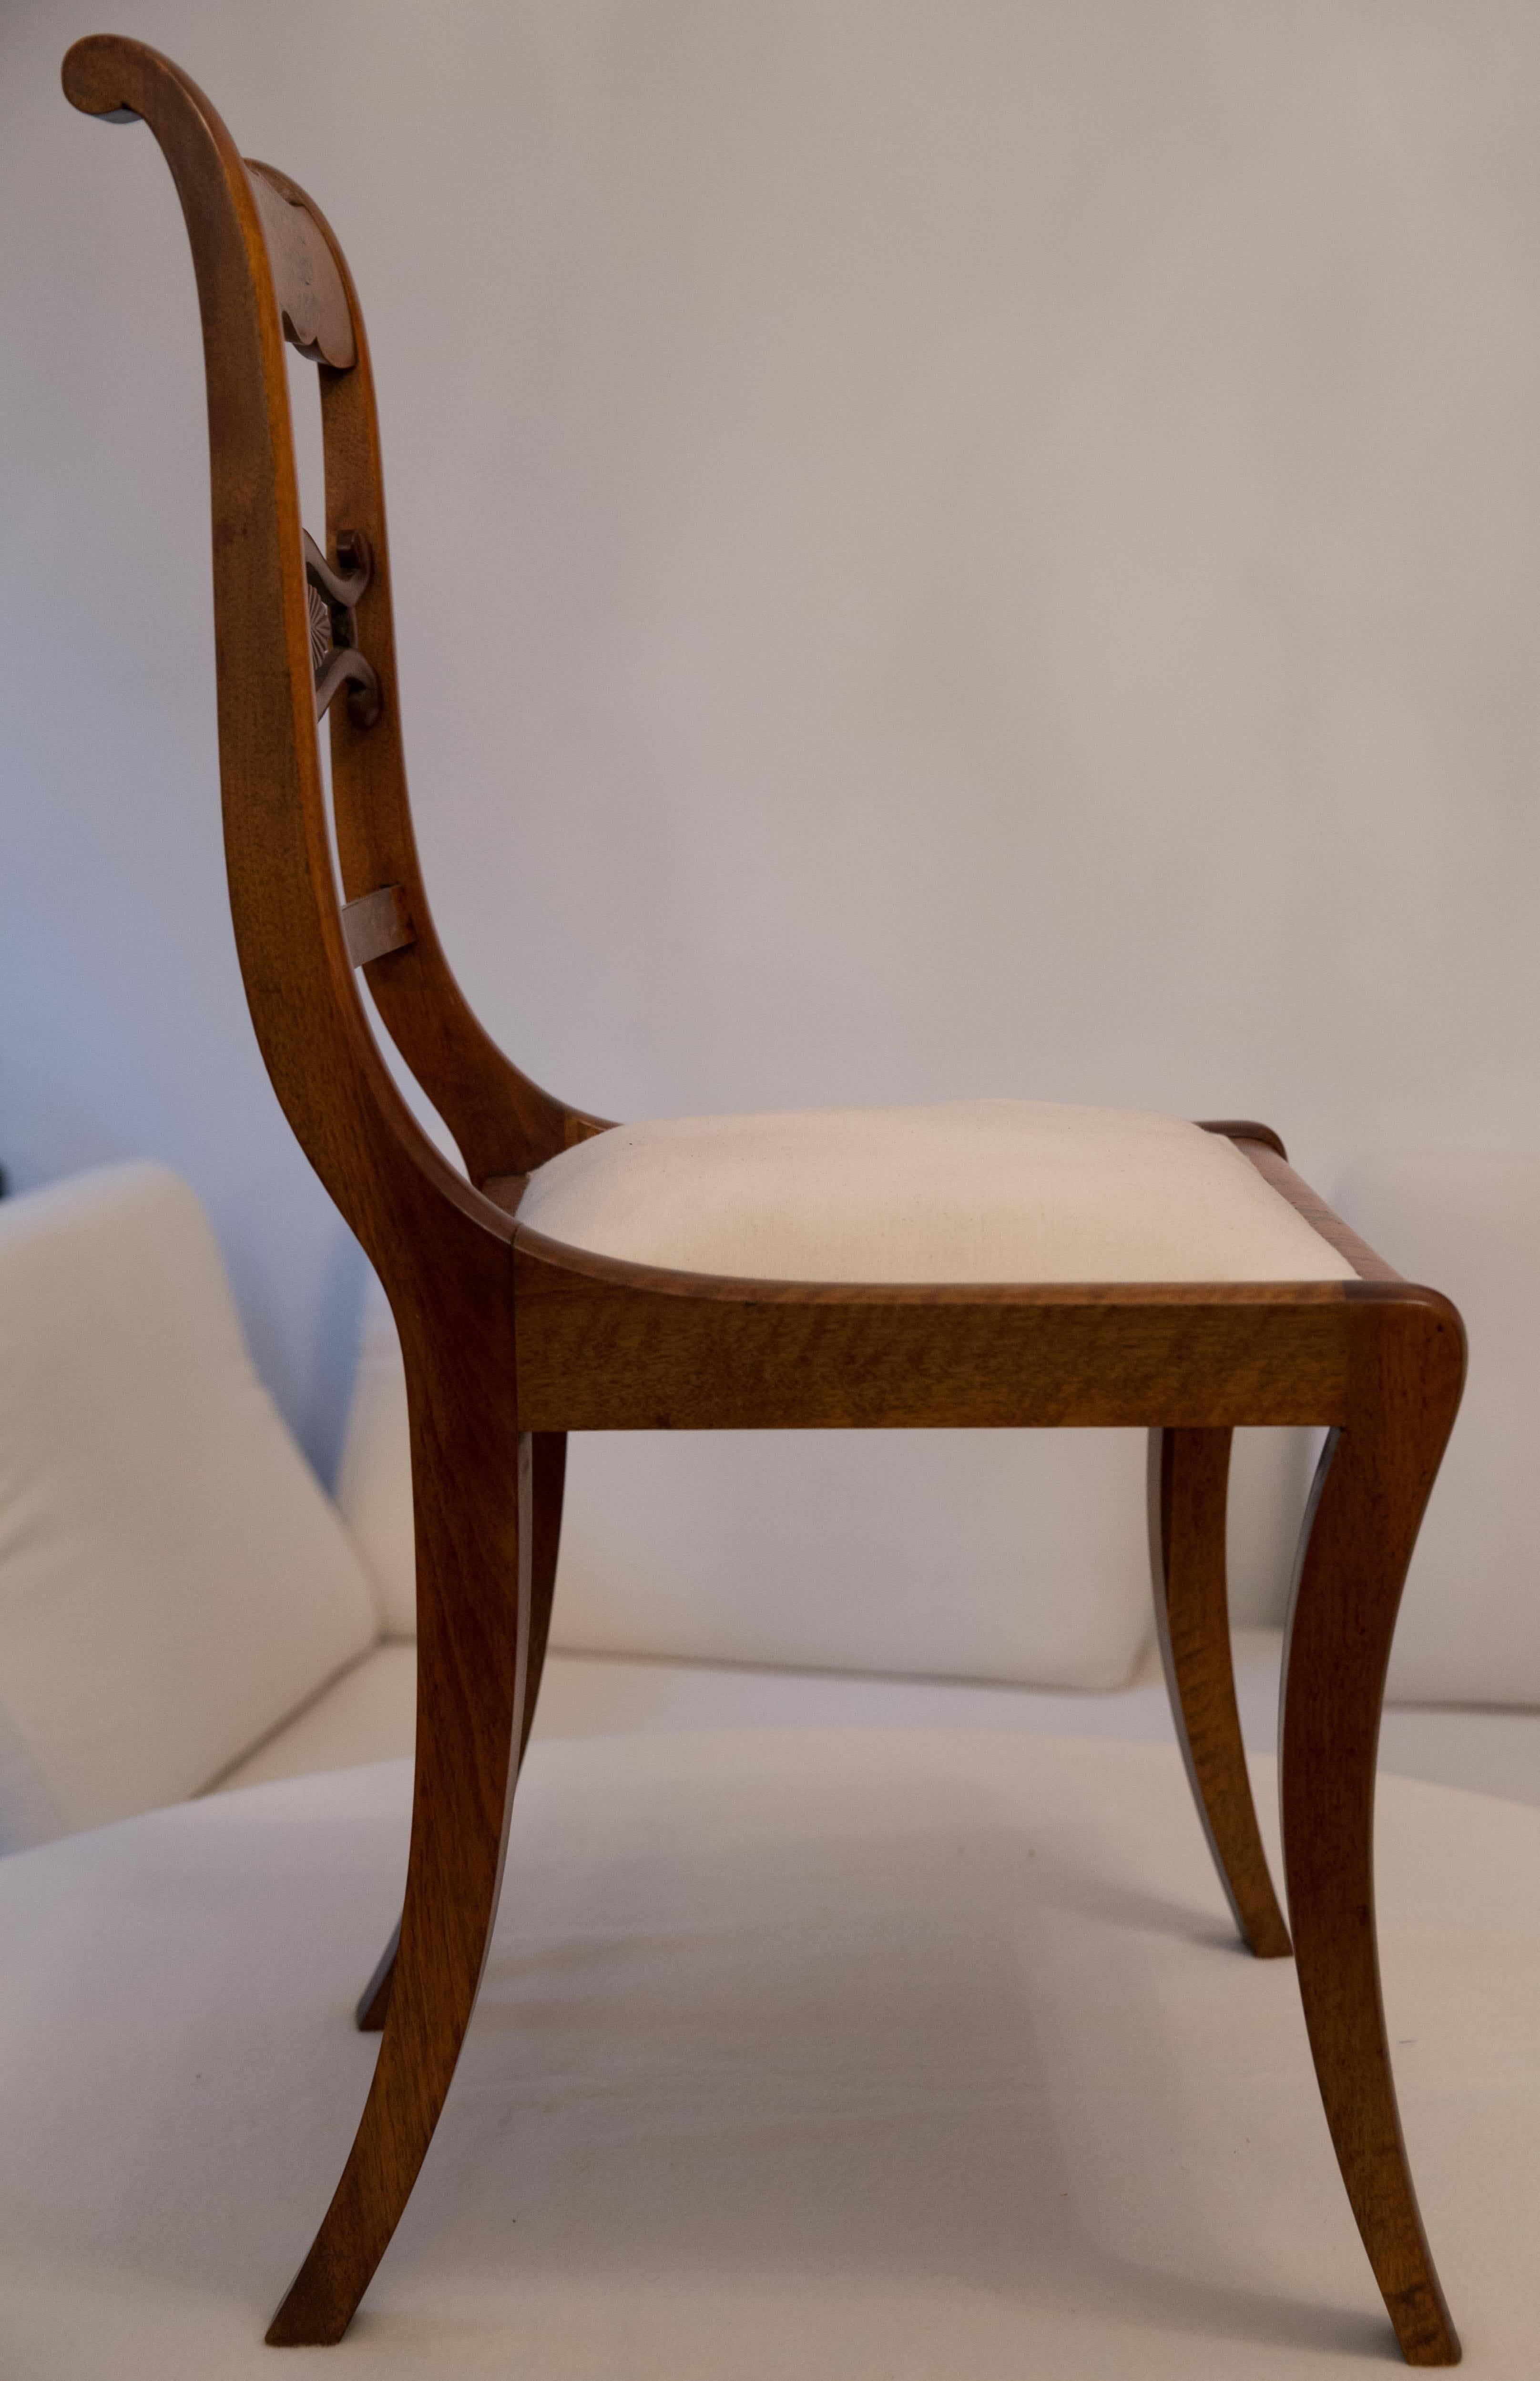 Set of Six Dining Chairs, Biedermeier, Germany, 1830, Burled Walnut by Knussmann In Excellent Condition For Sale In Ettlingen, Baden-Wurttemberg